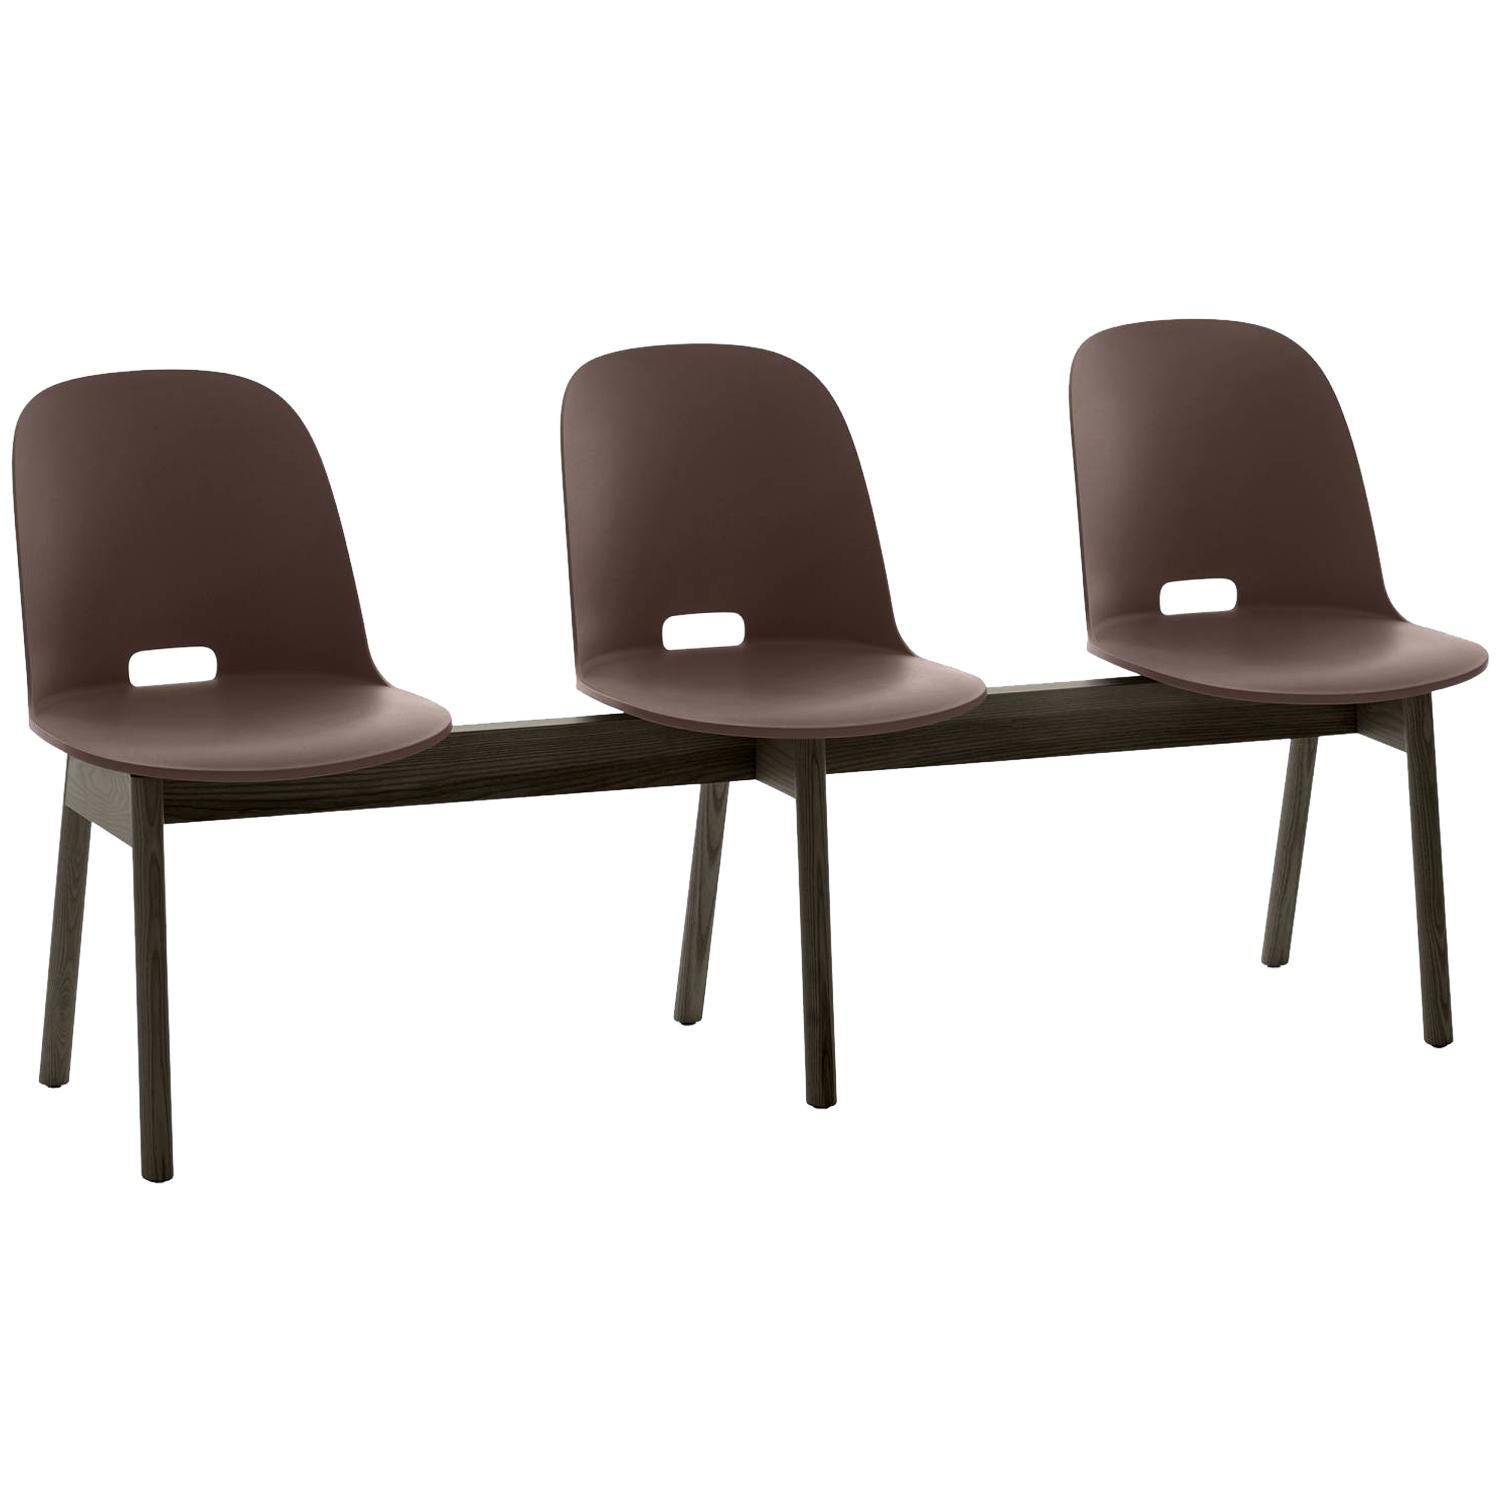 Emeco Alfi 3-Seat Bench in Brown & Dark Ash with High Back by Jasper Morrison